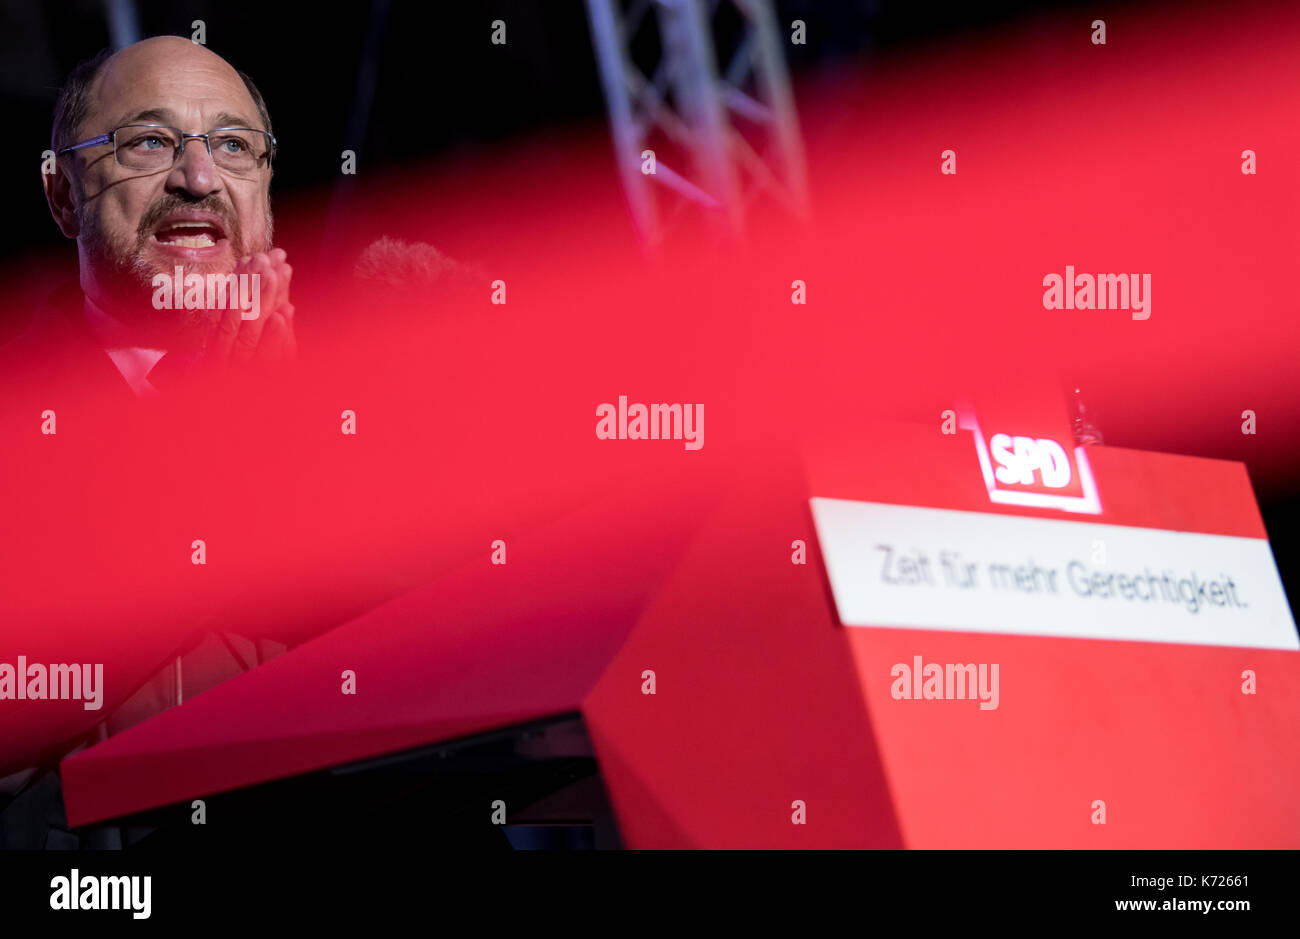 Munich, Germany. 14th Sep, 2017. Martin Schulz from the Social Democratic Party of Germany (SPD) and candidate for the German chancellorship, speaking at an election campaign event in Munich, Germany, 14 September 2017. Photo: Sven Hoppe/dpa/Alamy Live News Stock Photo